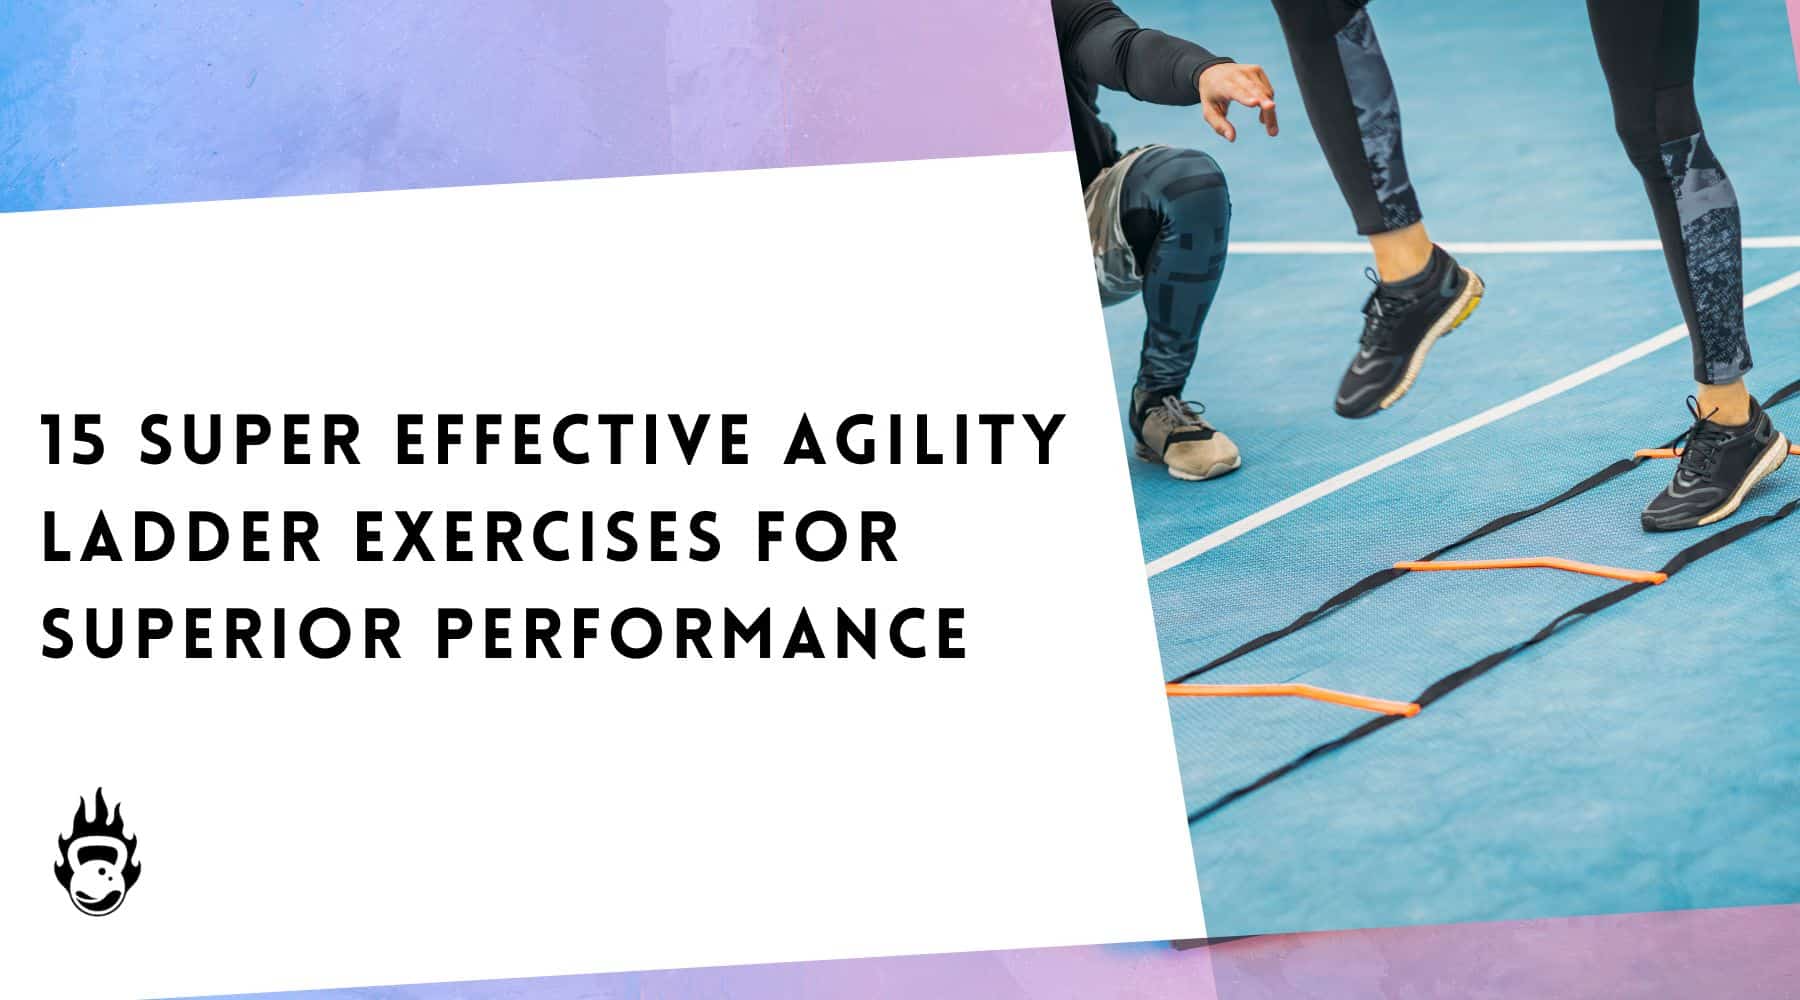 15 Super Effective Agility Ladder Exercises For Superior Performance